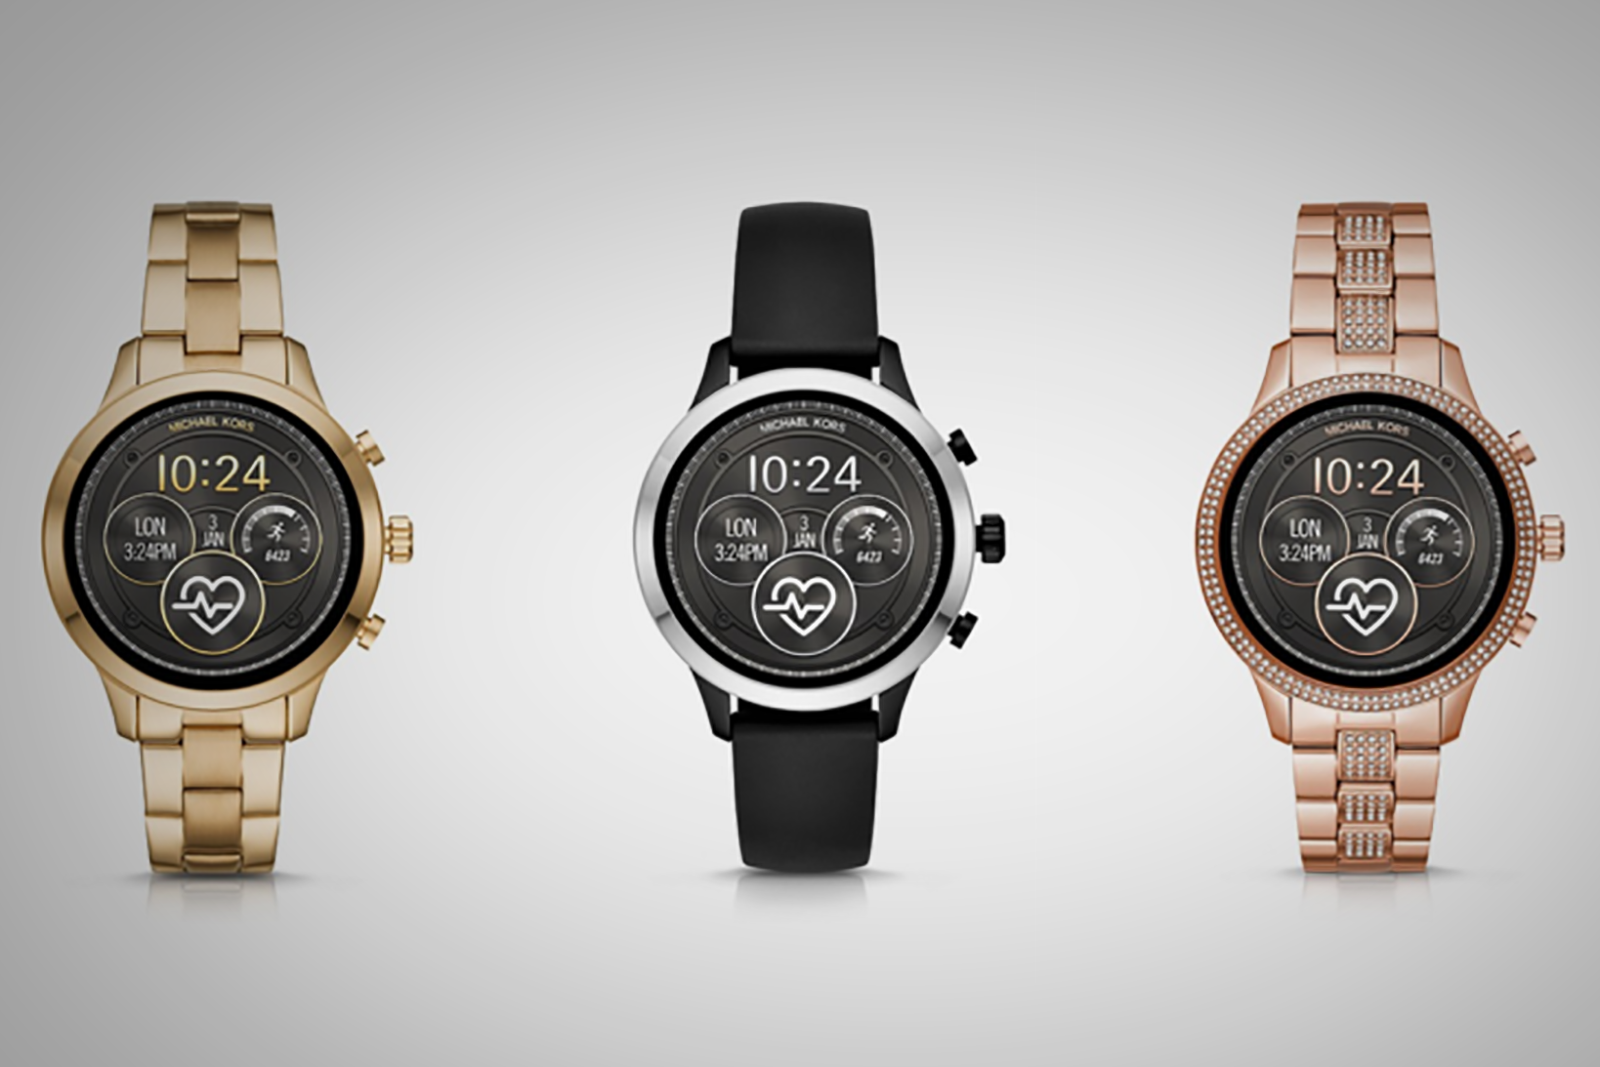 Michael Kors adds new Runway Wear OS watches to Access line